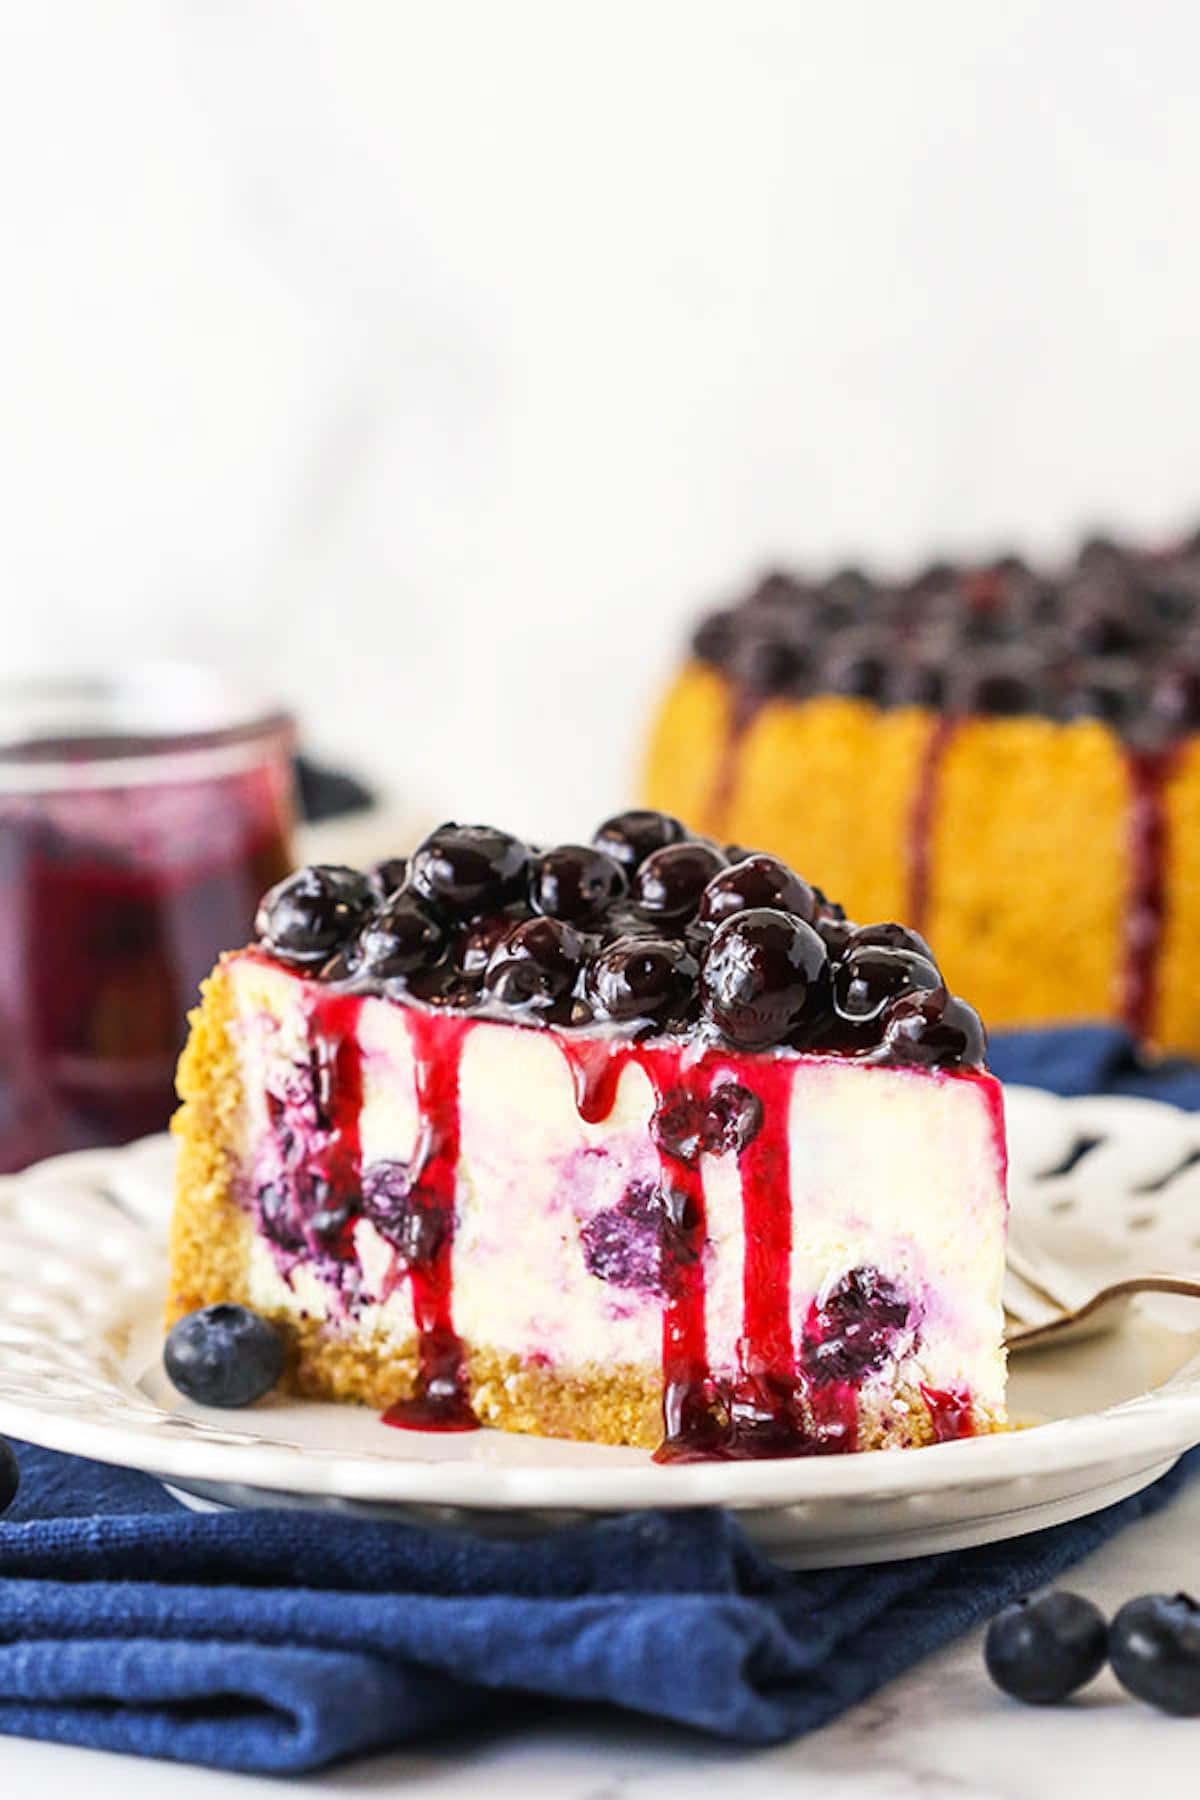 A Piece of Blueberry Cheesecake with a Bowl of Sauce and the Rest of the Cheesecake in the Background